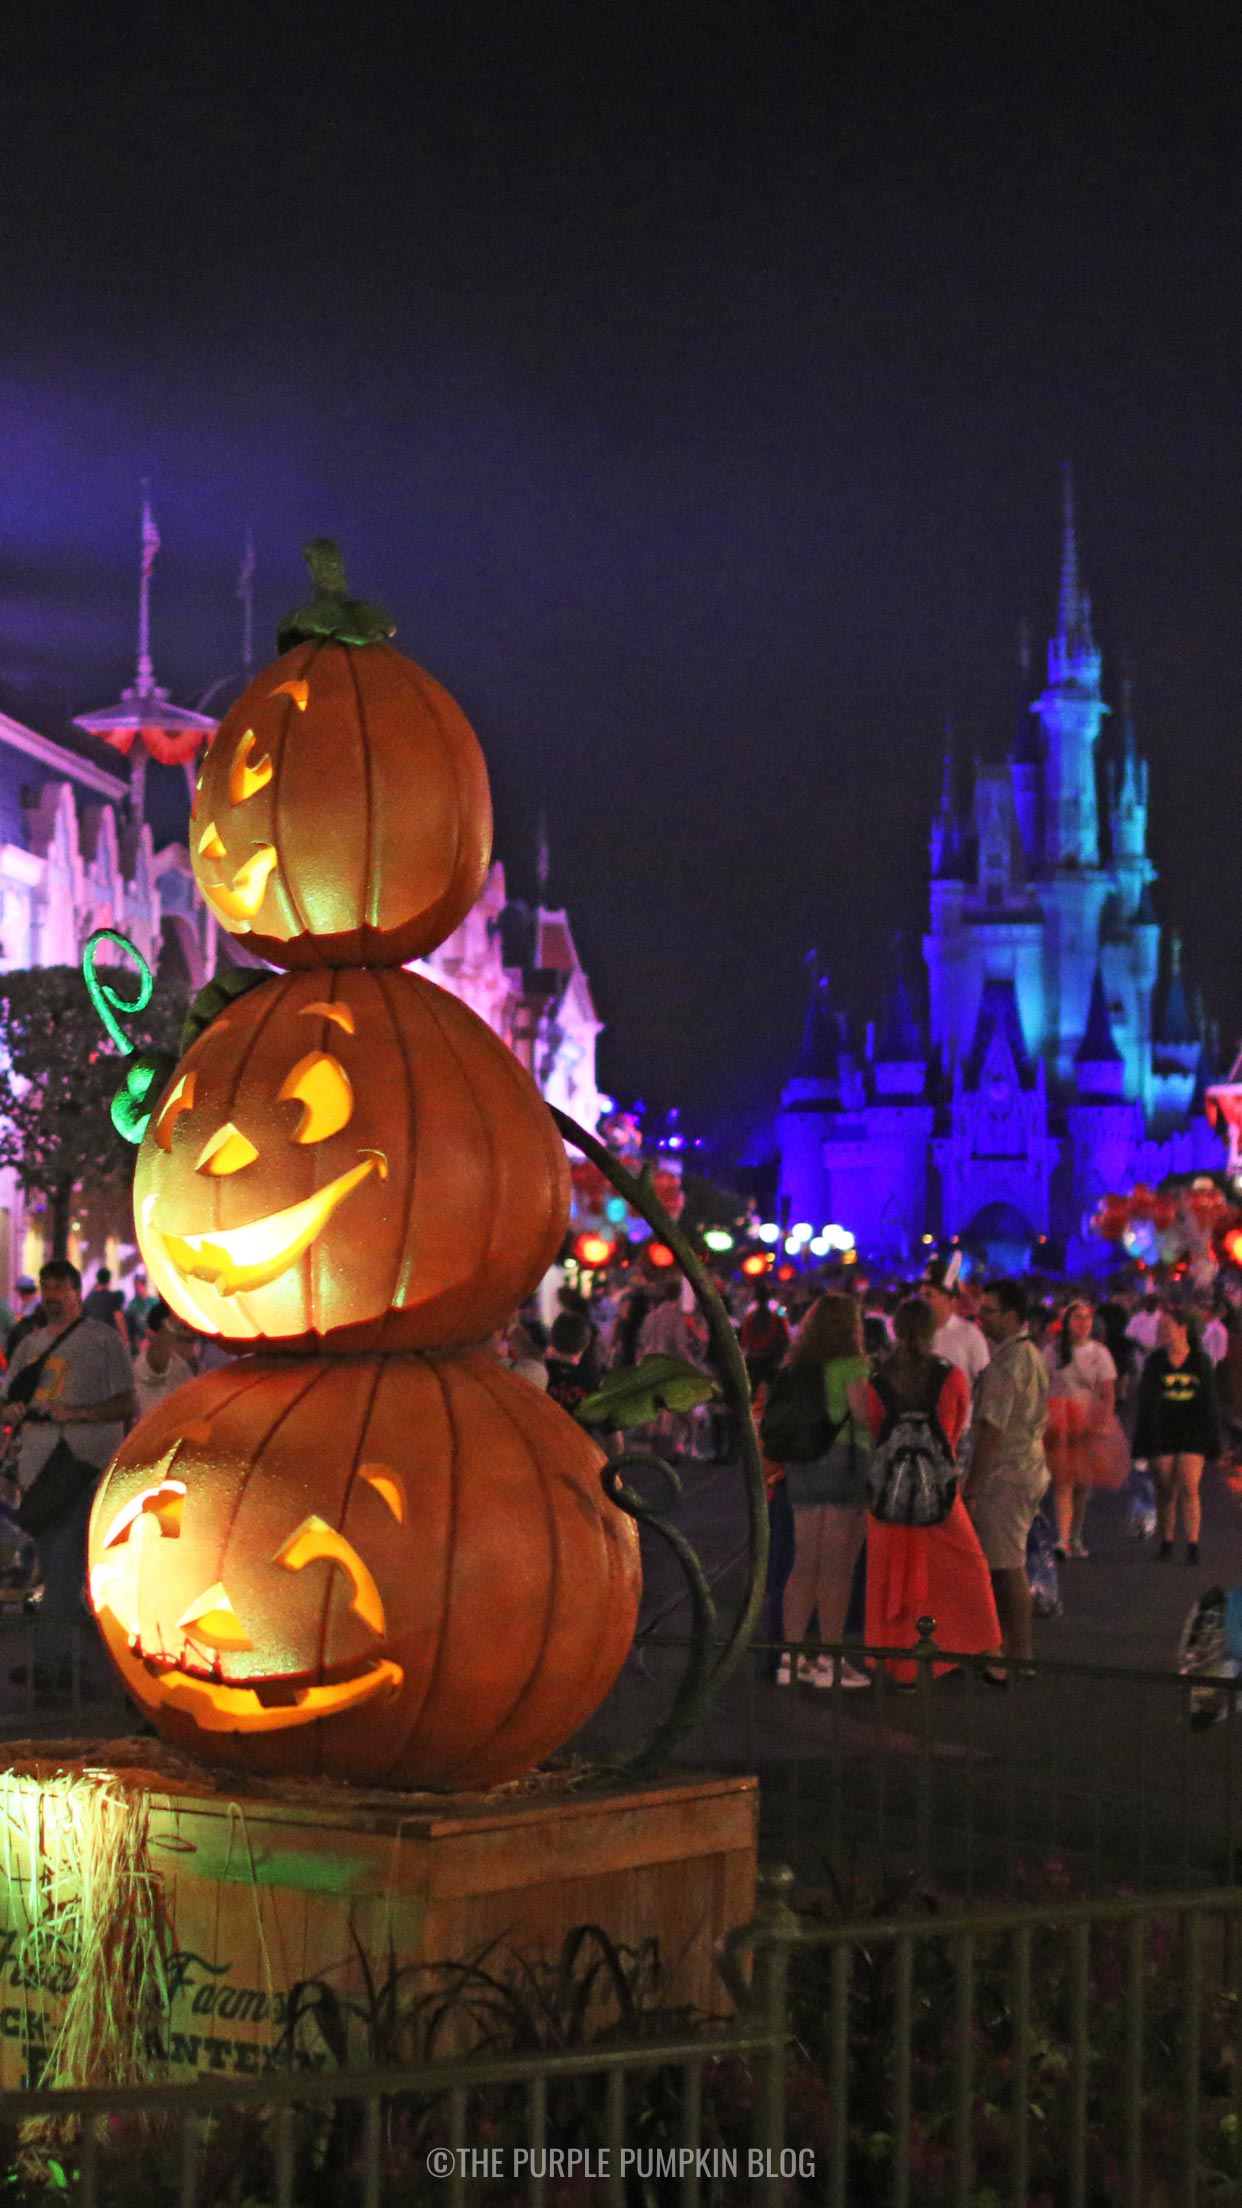 Awesome Disney World Halloween iPhone Wallpaper to Download!